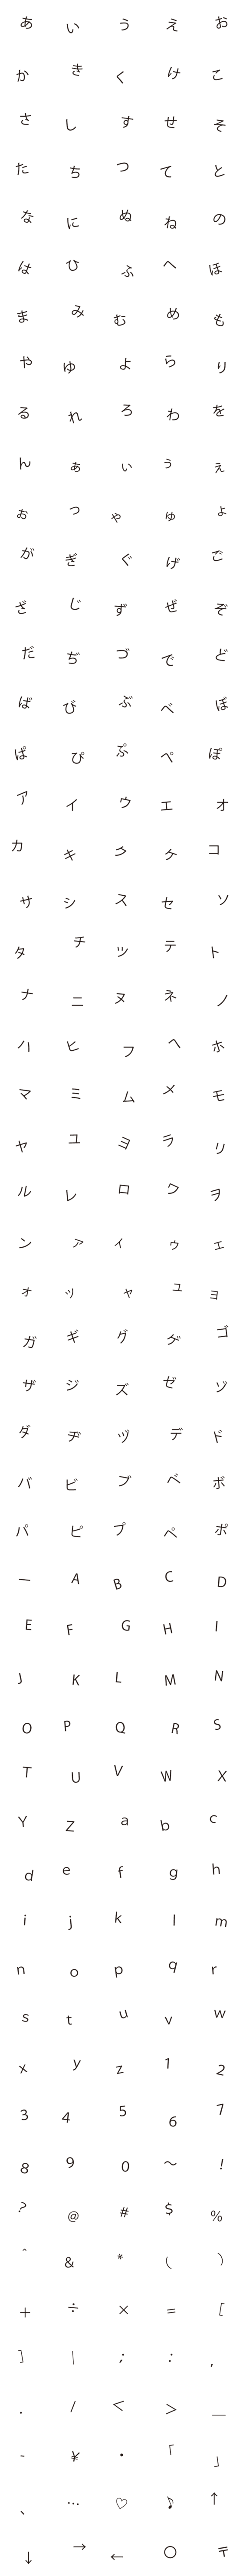 [LINE絵文字]シンプル暴れ文字-文字遊びの画像一覧